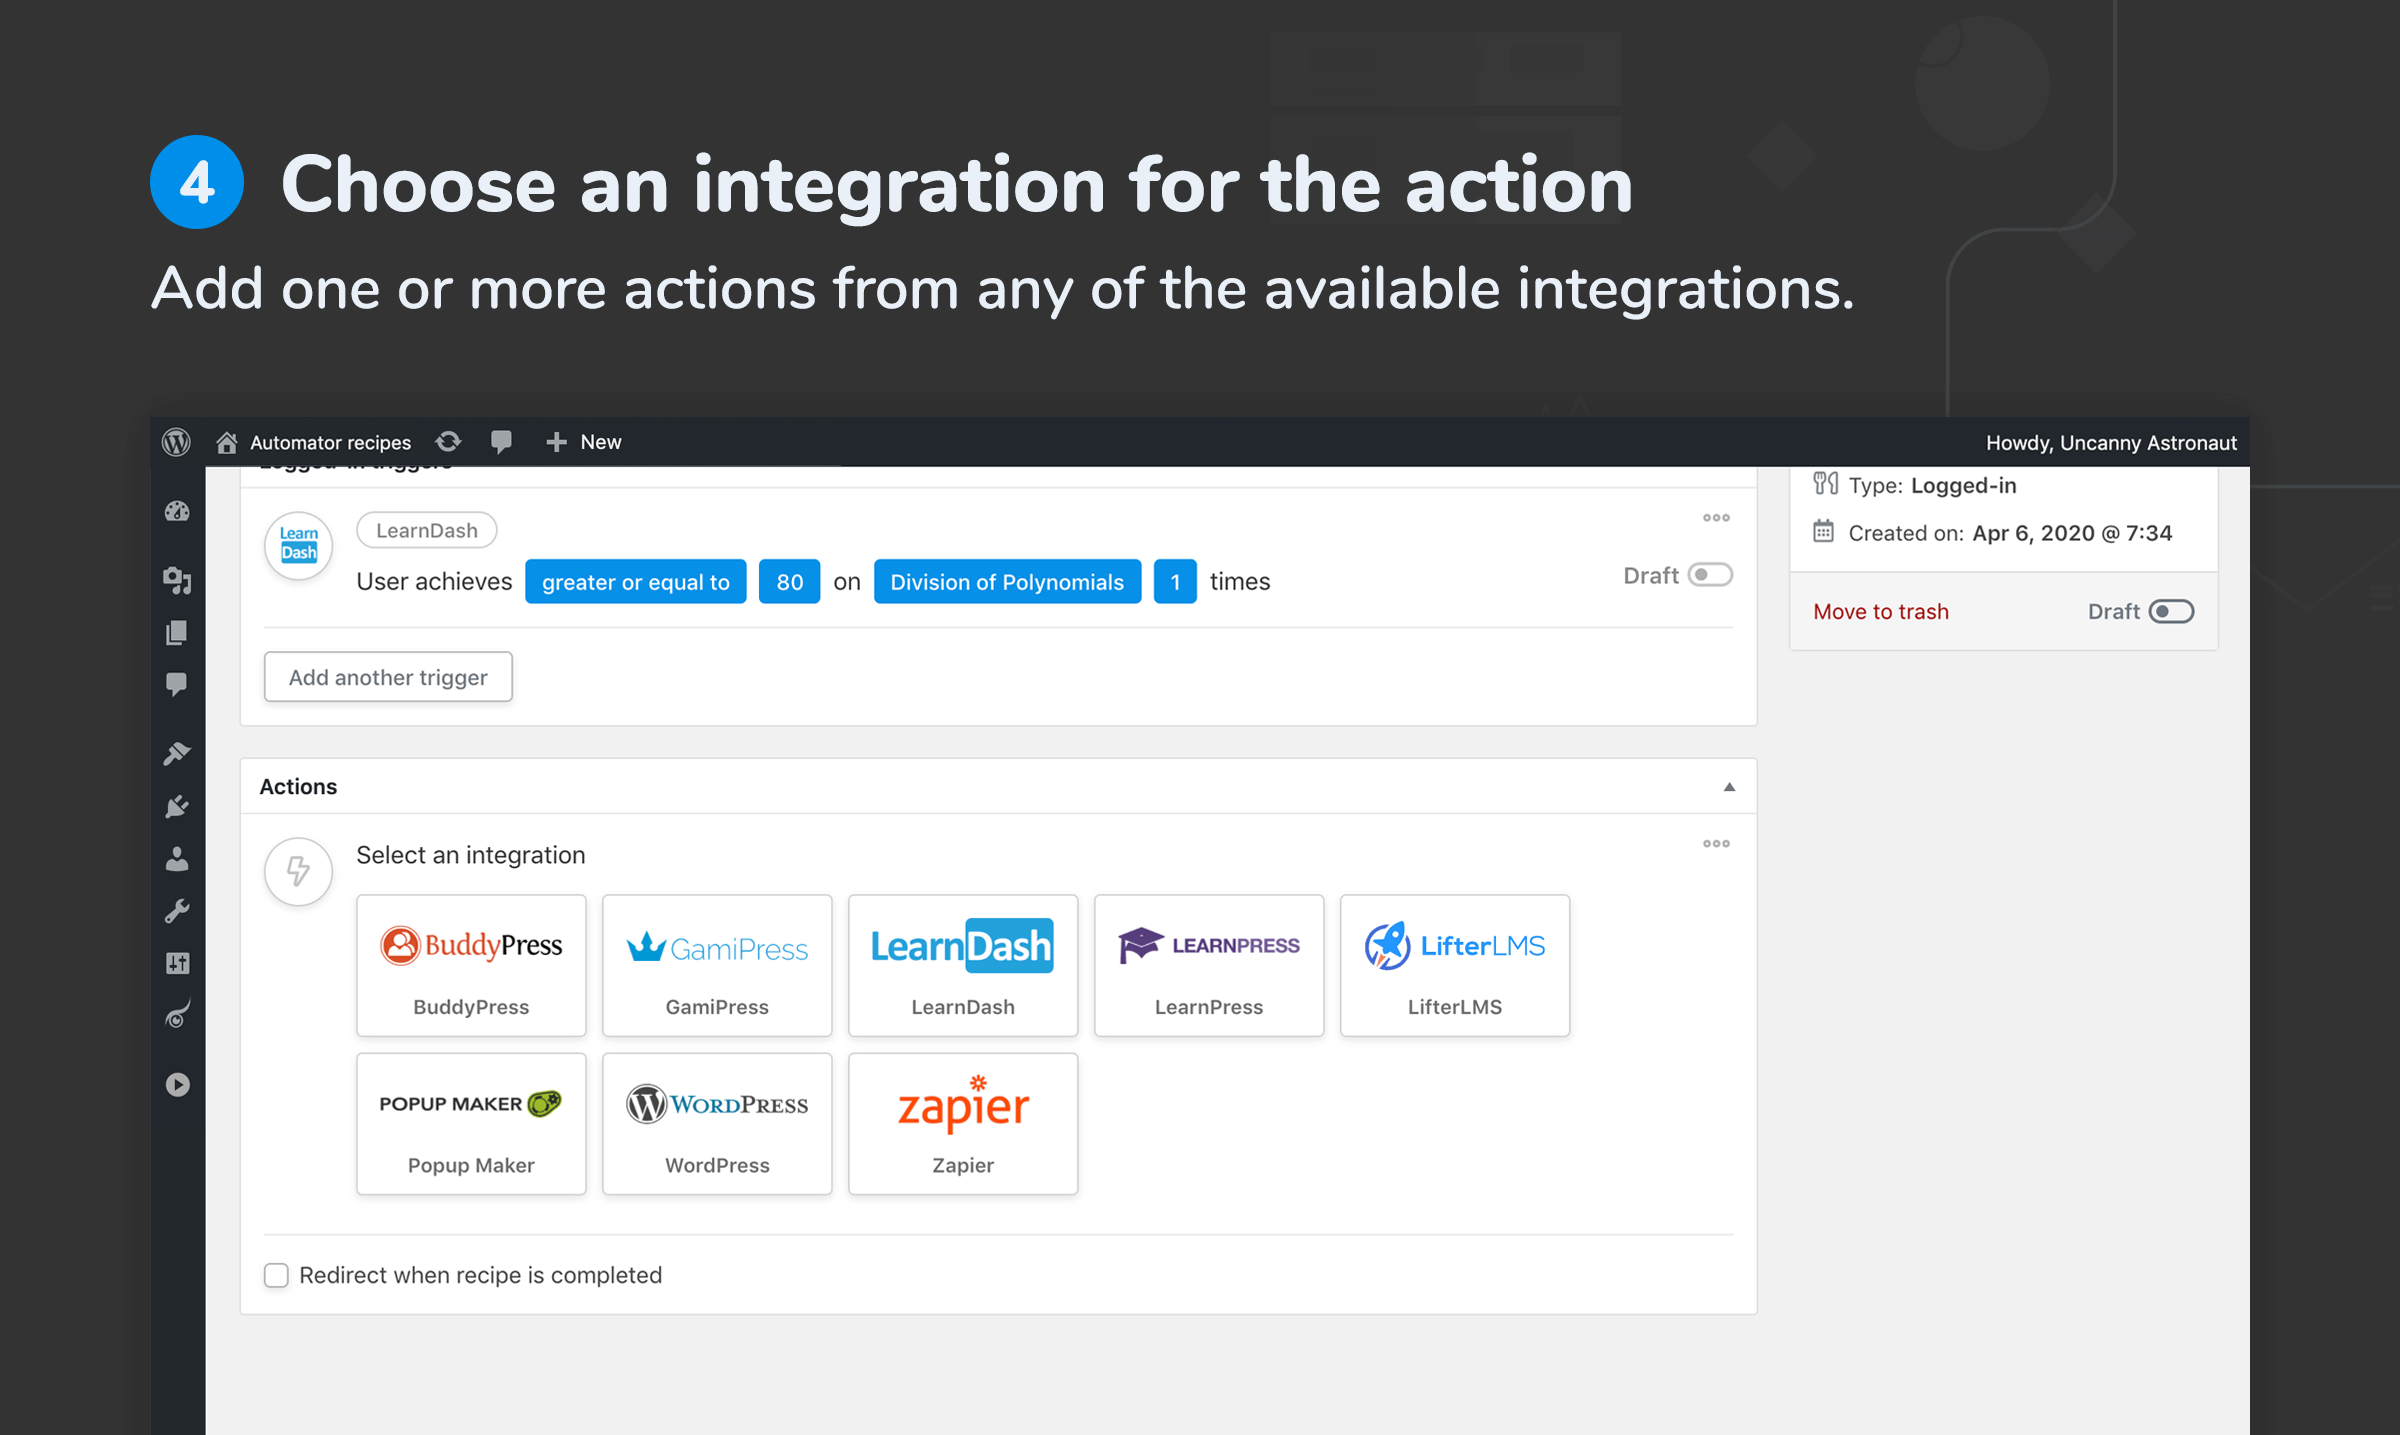 Add one or more actions from any of the available integrations